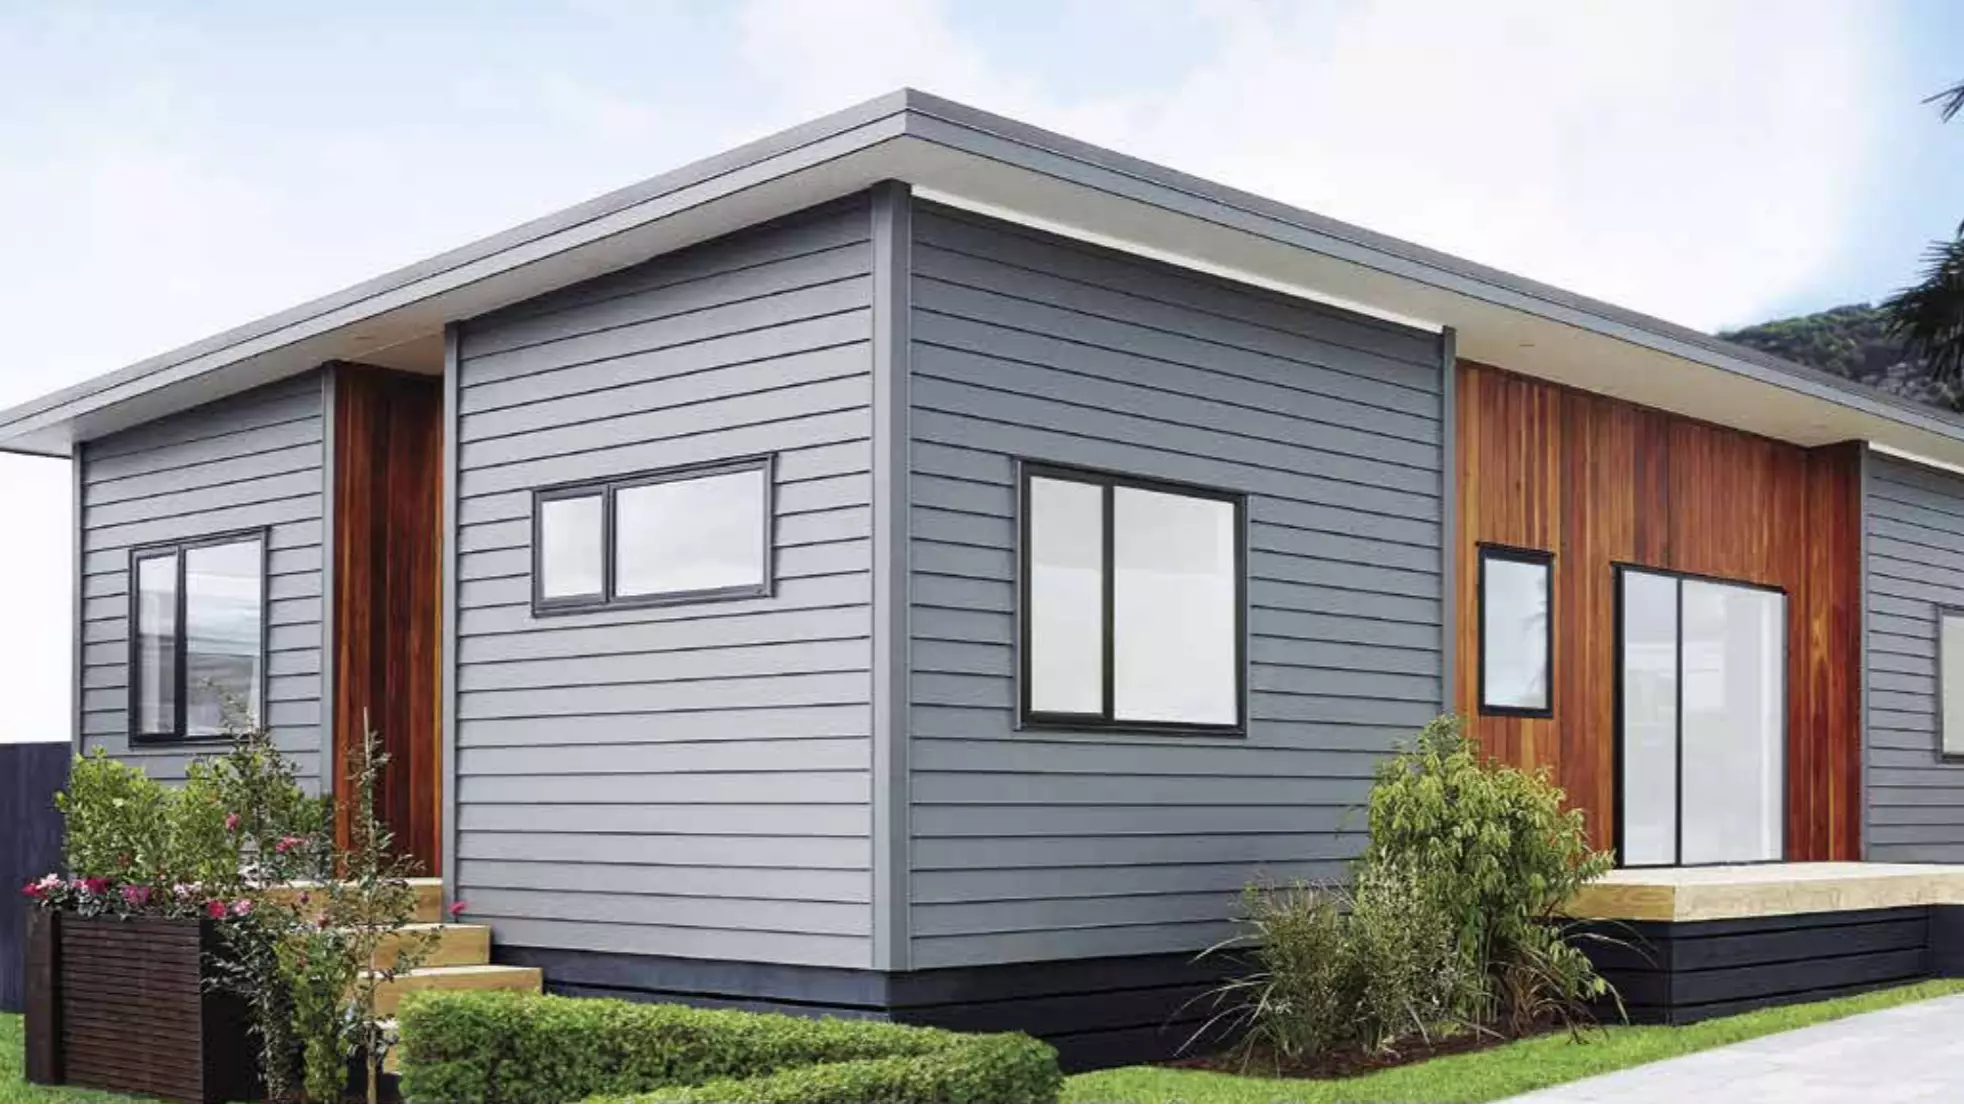 New Zealand Bunnings Has A Flat Pack Two Bedroom House That Costs Less Than $100,000